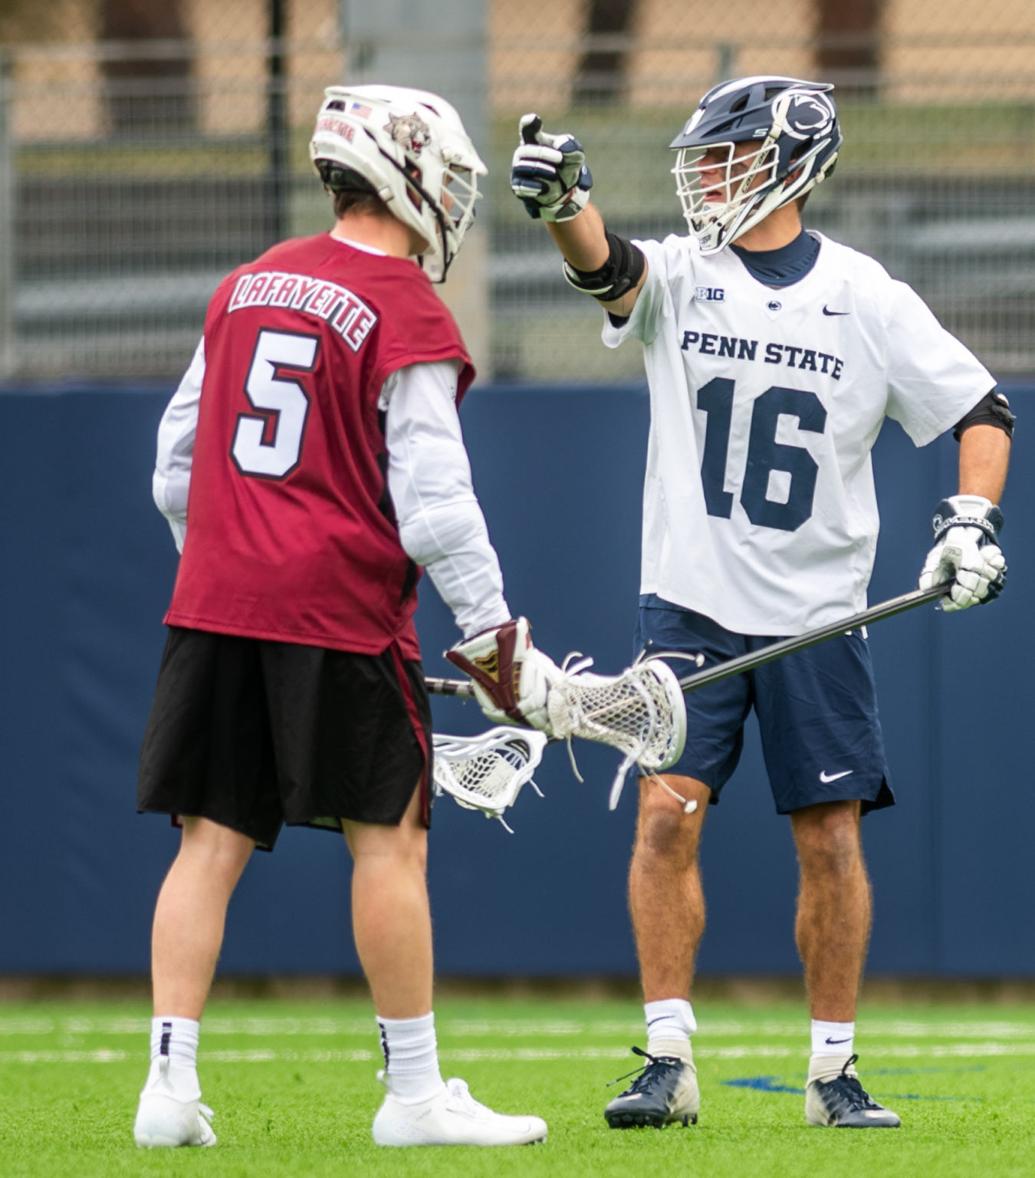 Penn State men’s lacrosse all-time team | Who are the best players in